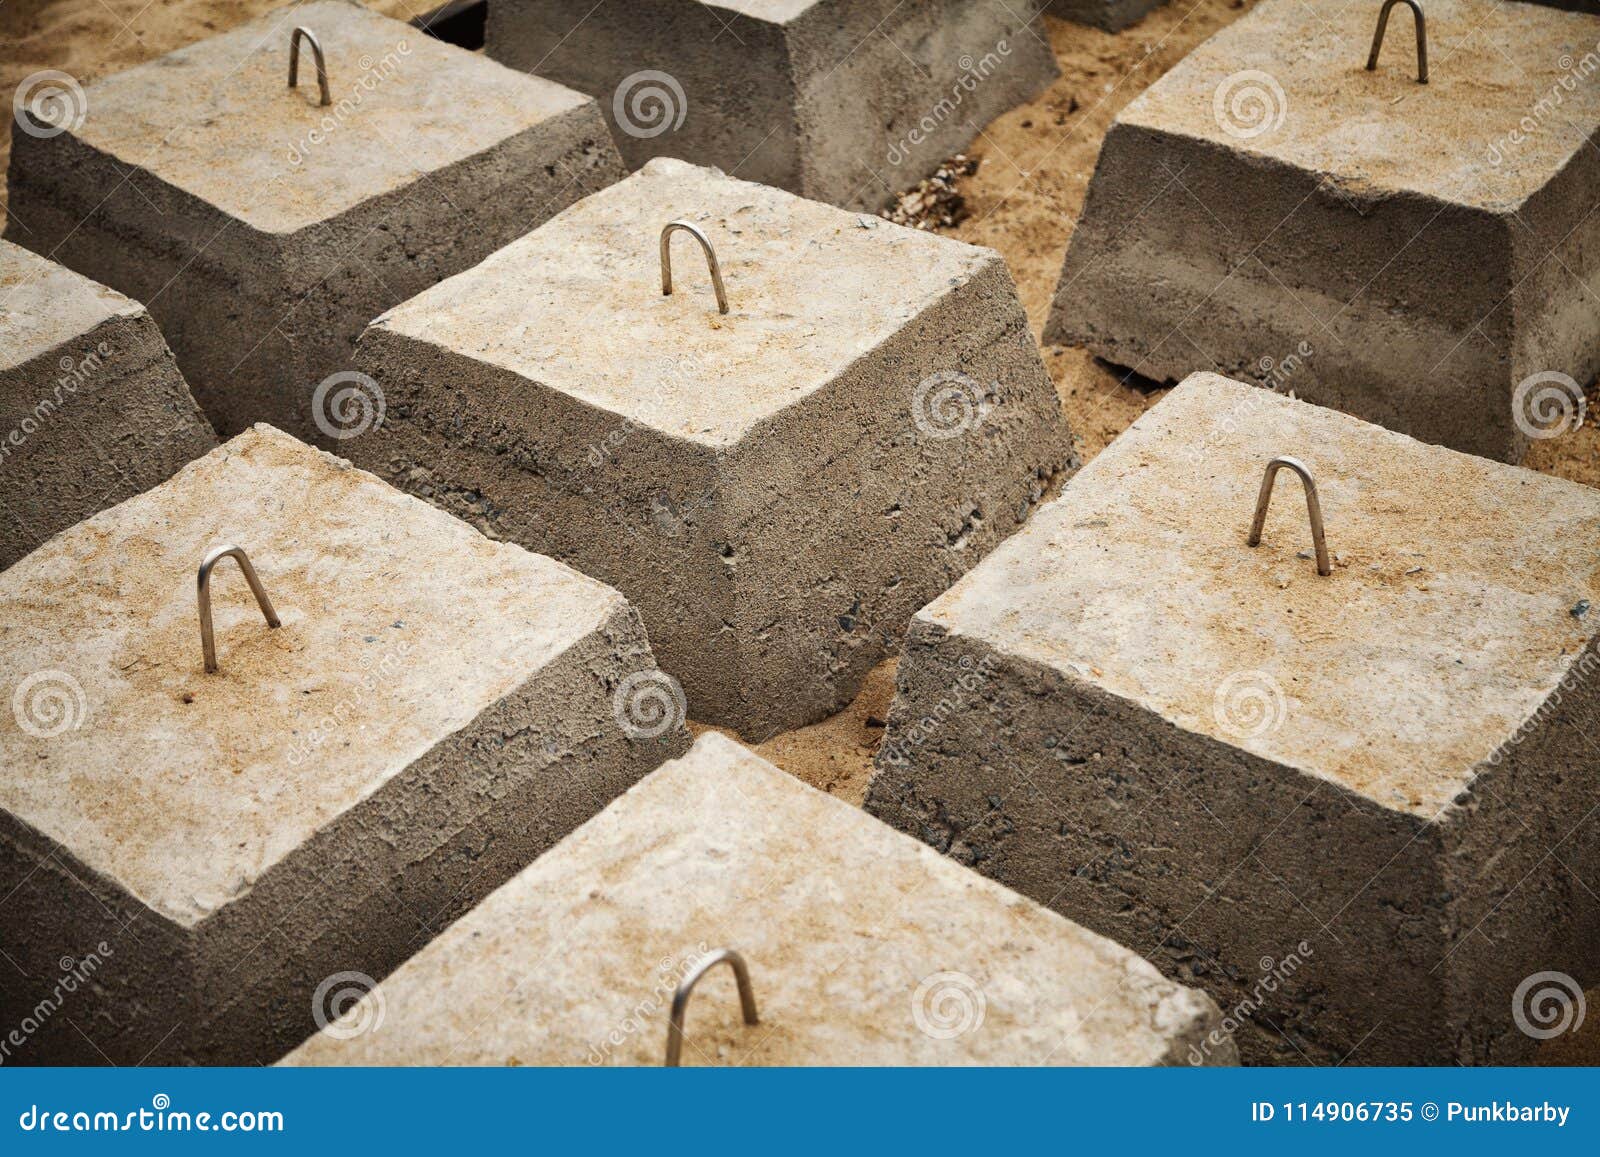 Many Concrete Blocks Arranged in Rows for a Building Foundation Stock